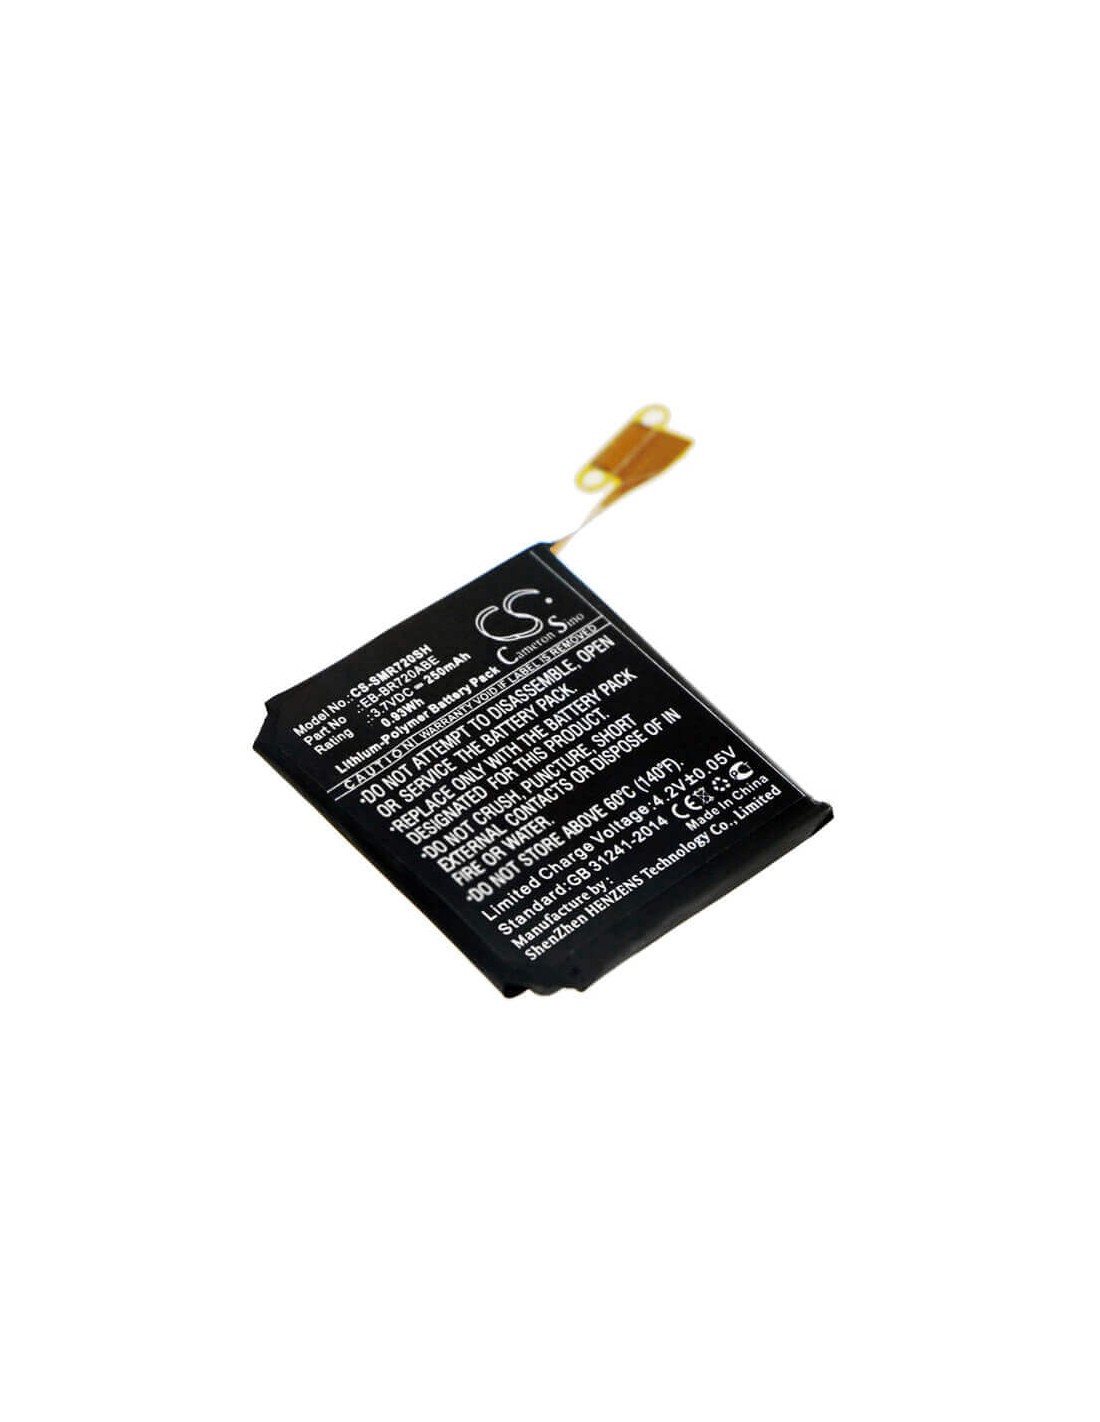 Battery for Samsung, Gear S2, Gear S2 Classic, R7200 3.7V, 250mAh - 0.93Wh